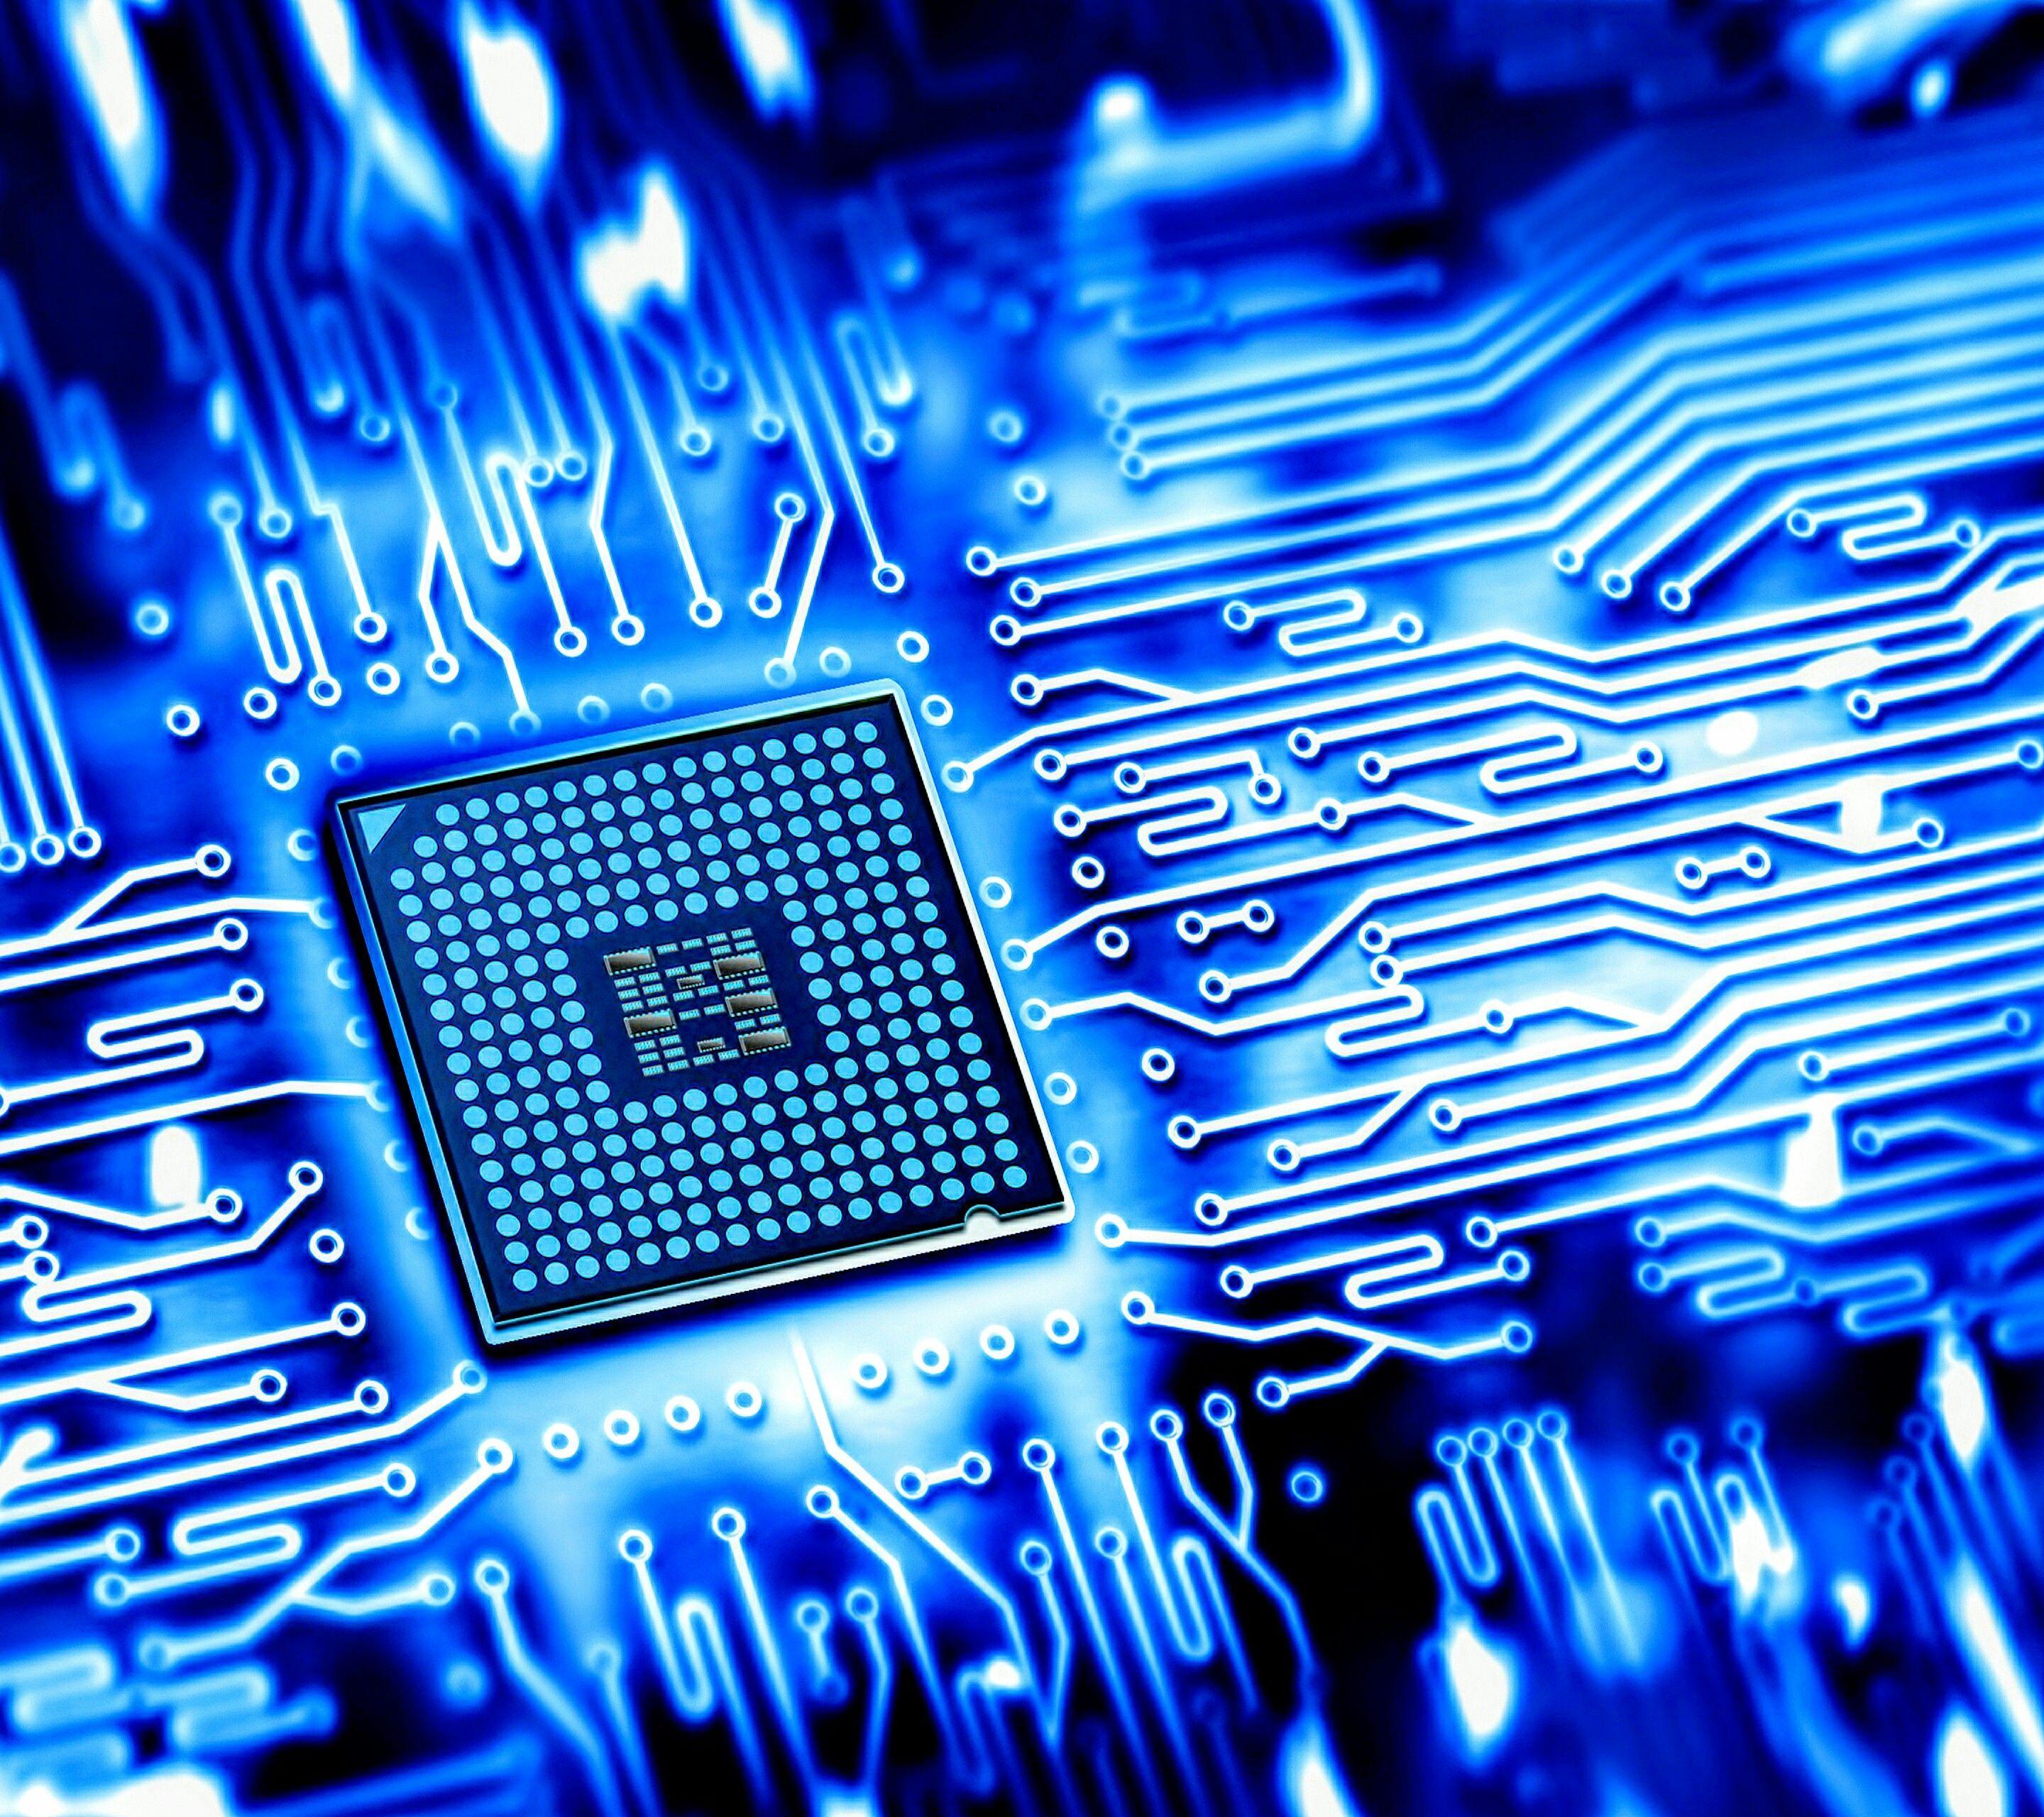 Processor Photos, Download The BEST Free Processor Stock Photos & HD Images